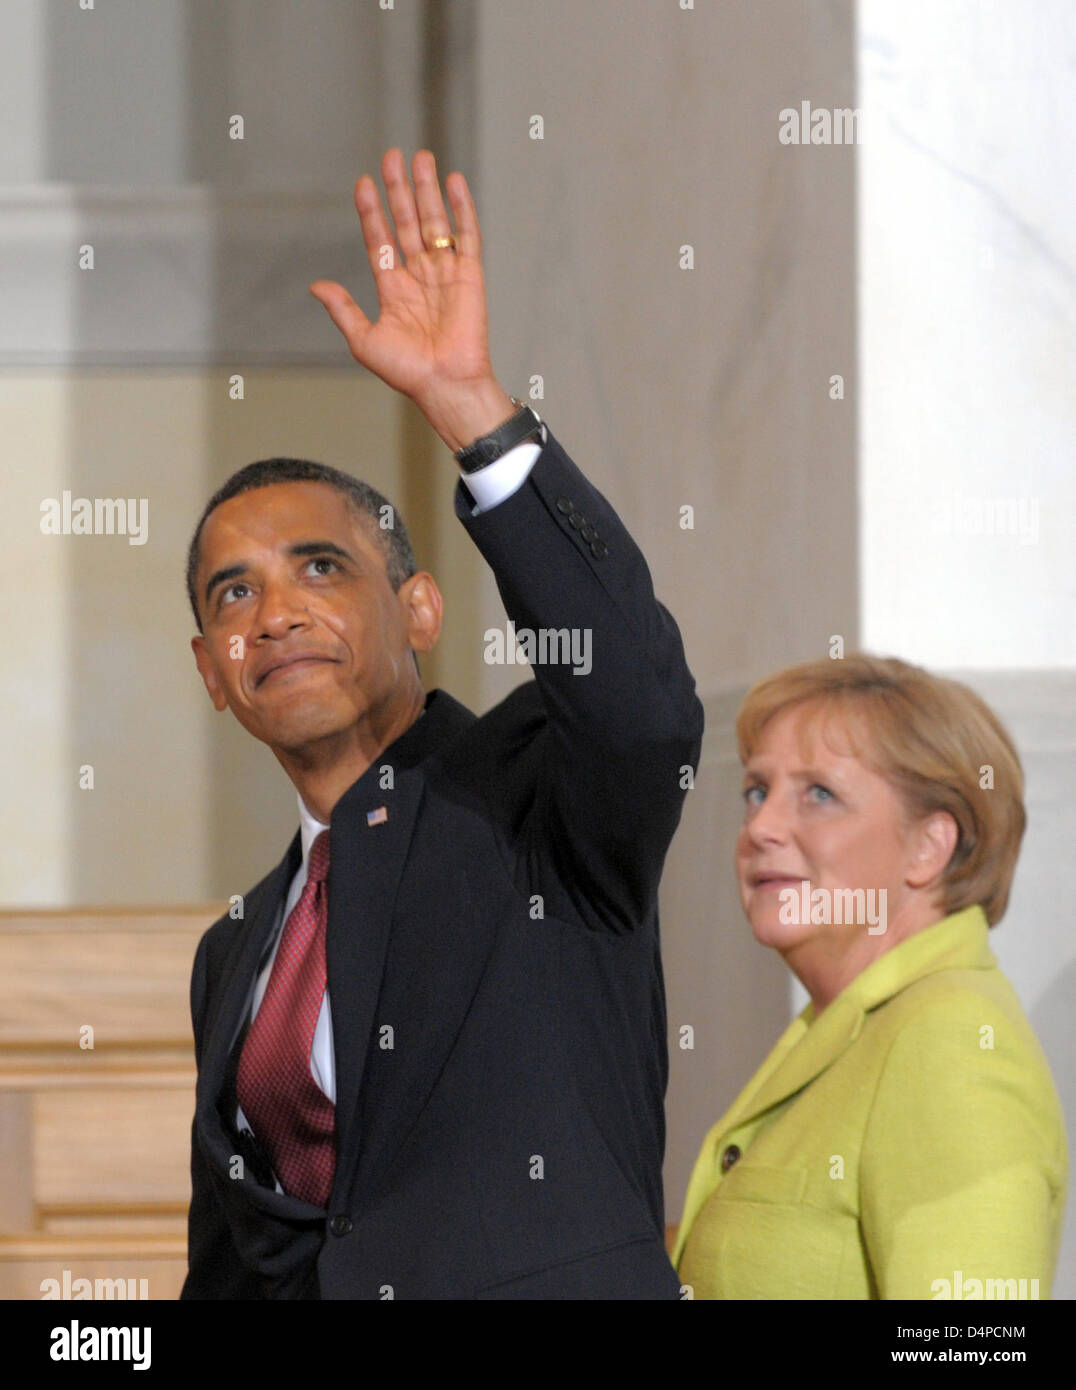 US President Barack Obama and German Chancellor Angela Merkel visit the Frauenkirche in Dresden, Germany, 05 June 2009. During his short stay in Germany, the President will also visit the former concentration camp Buchenwald near Weimar and a US hospital in Landstuhl. Photo: Matthias Hiekel Stock Photo